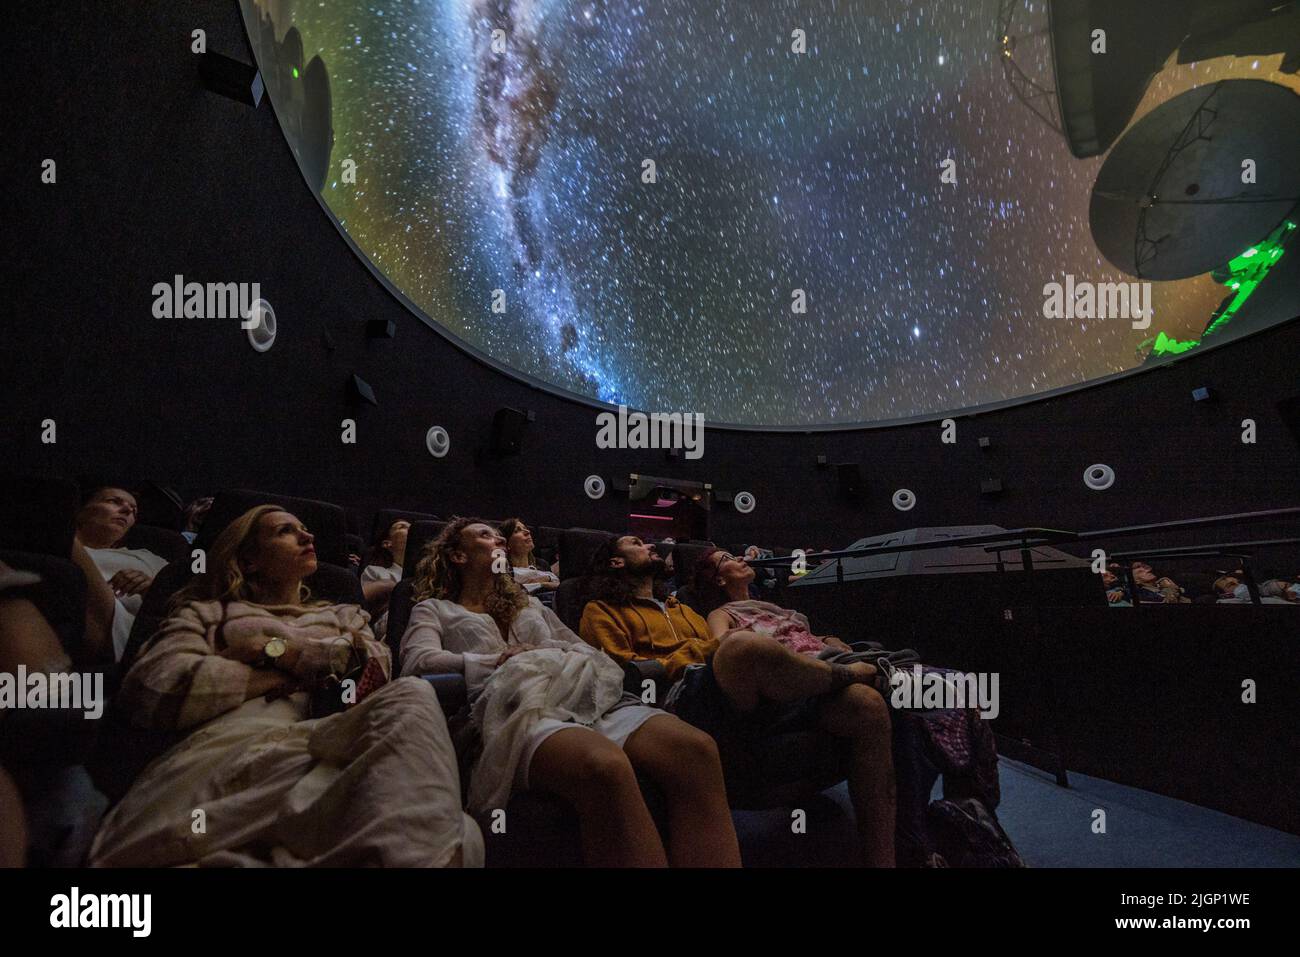 Tourists at the 'Ull del Montsec' planetarium during the projection of the video about the night, the Milky Way and astronomy (Àger, Lleida, Spain) Stock Photo